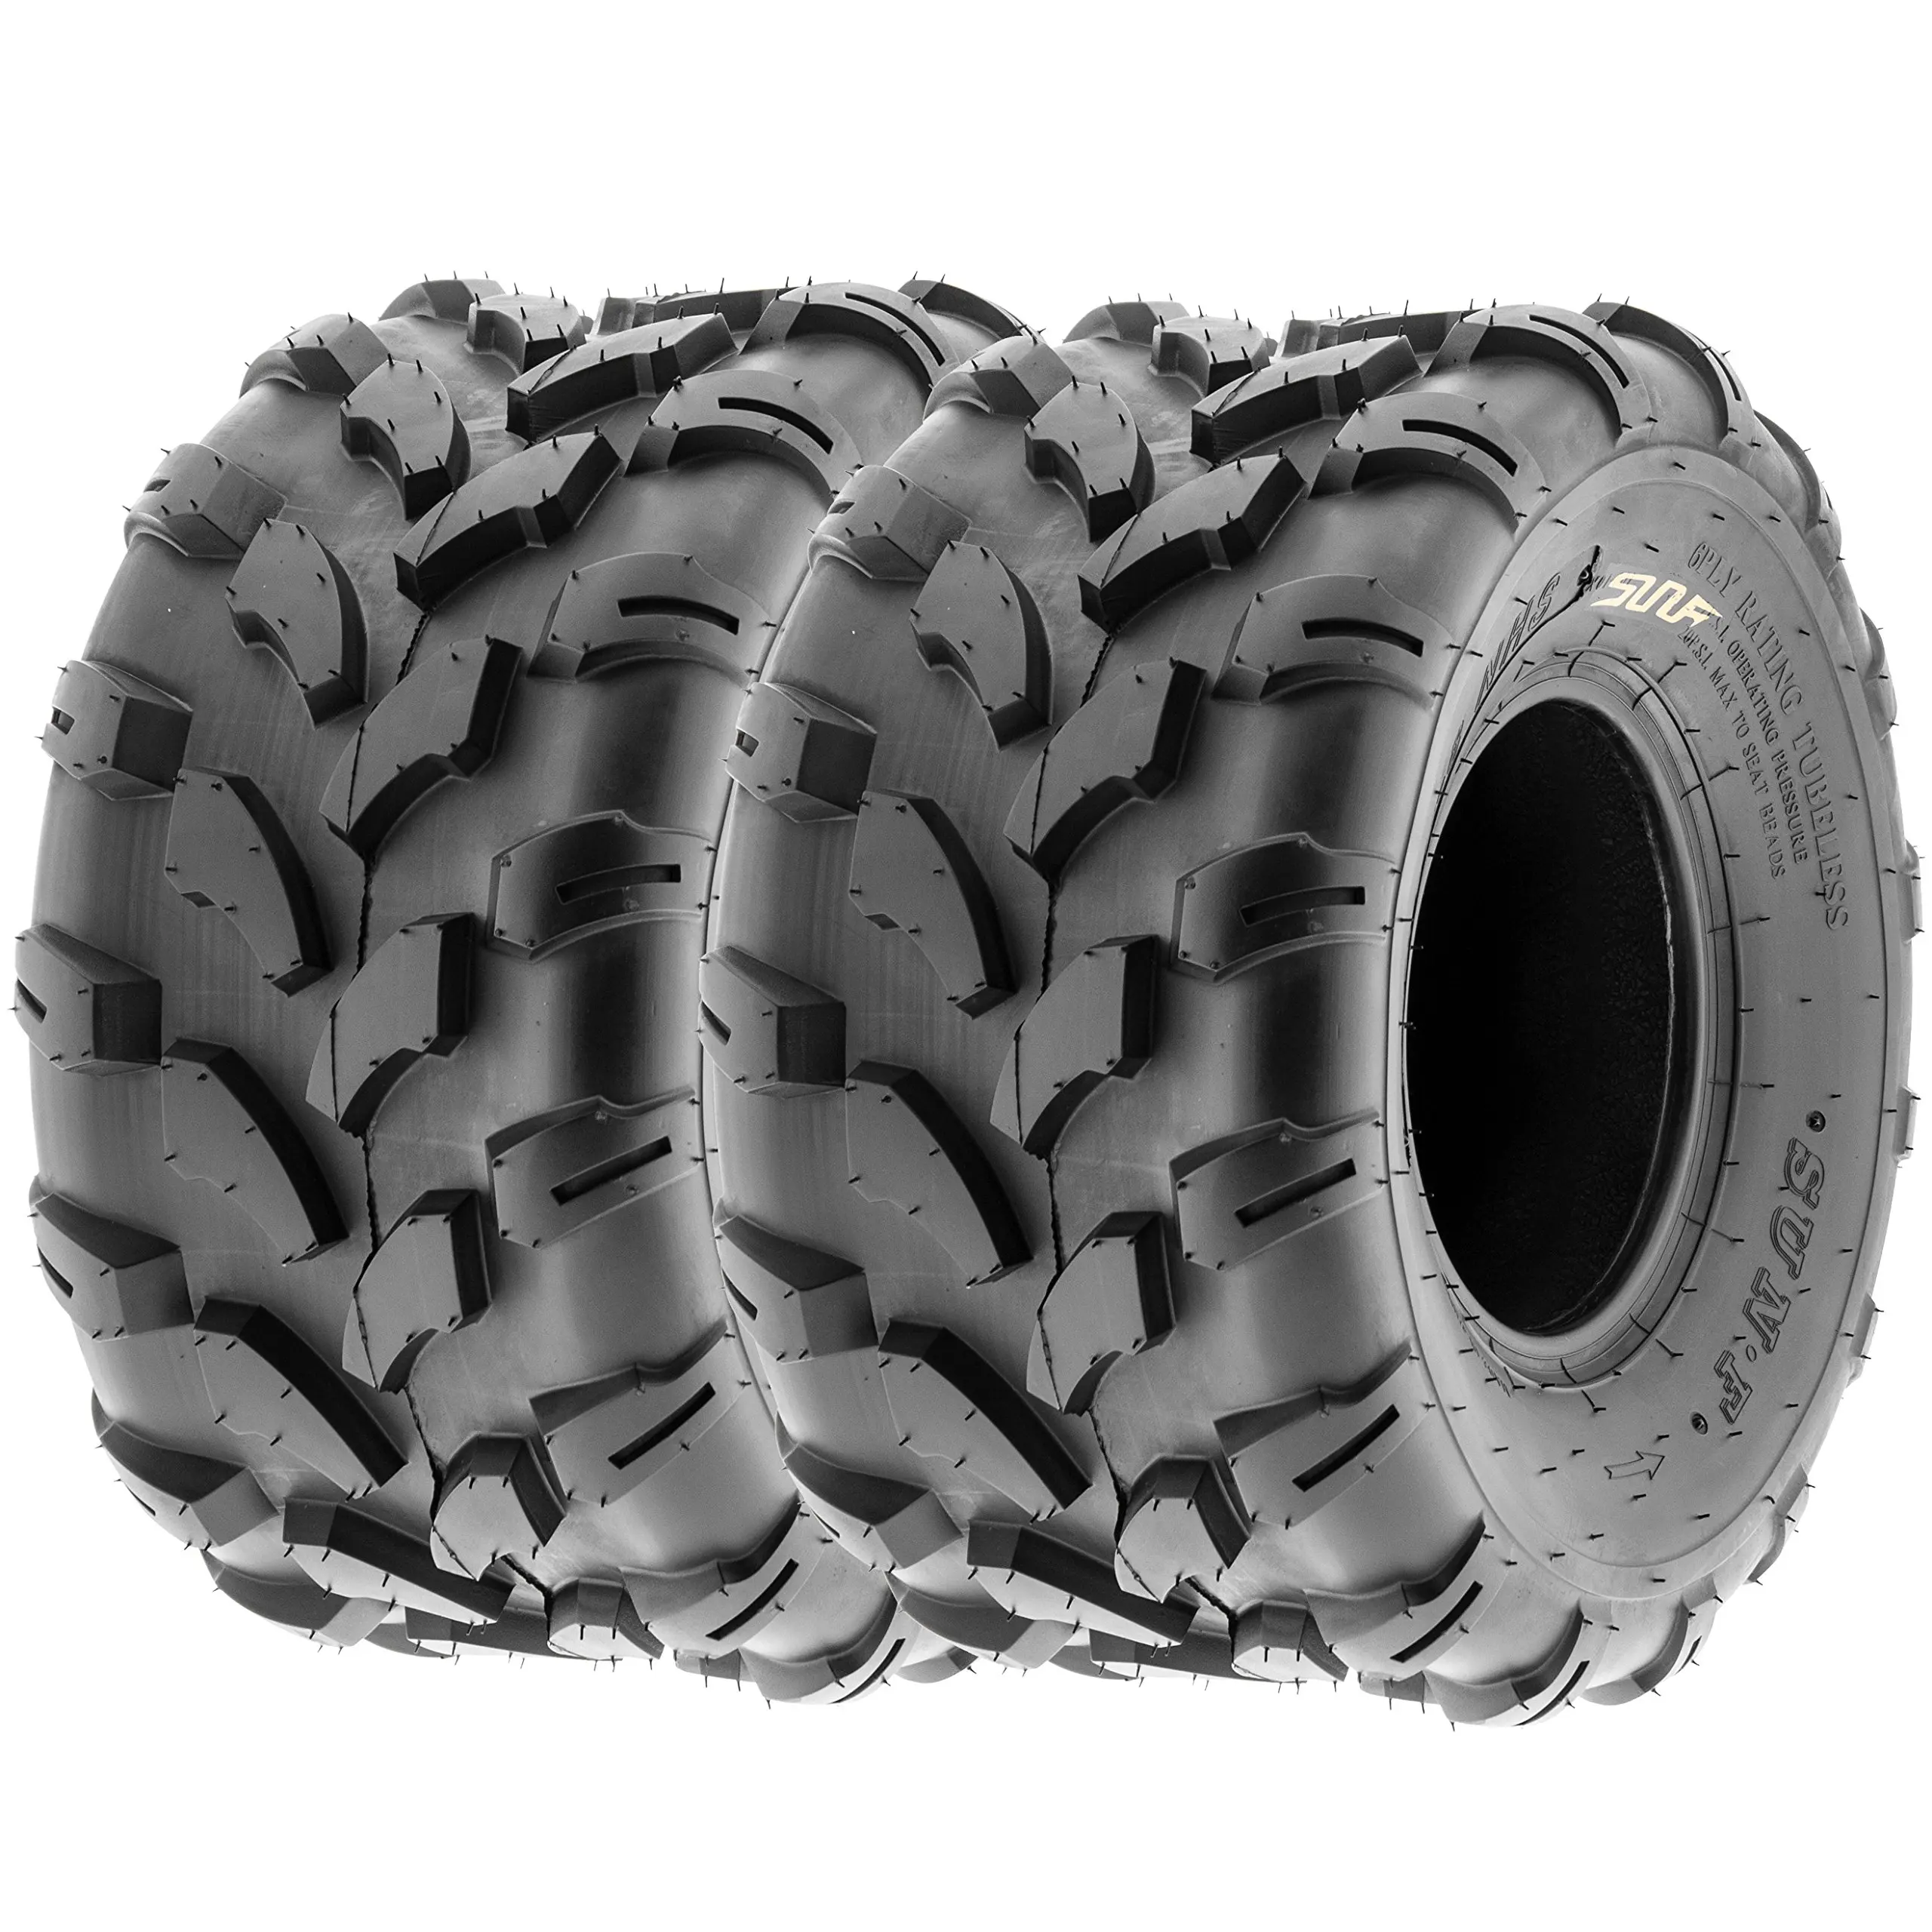 20x10x8 lawn tractor tires